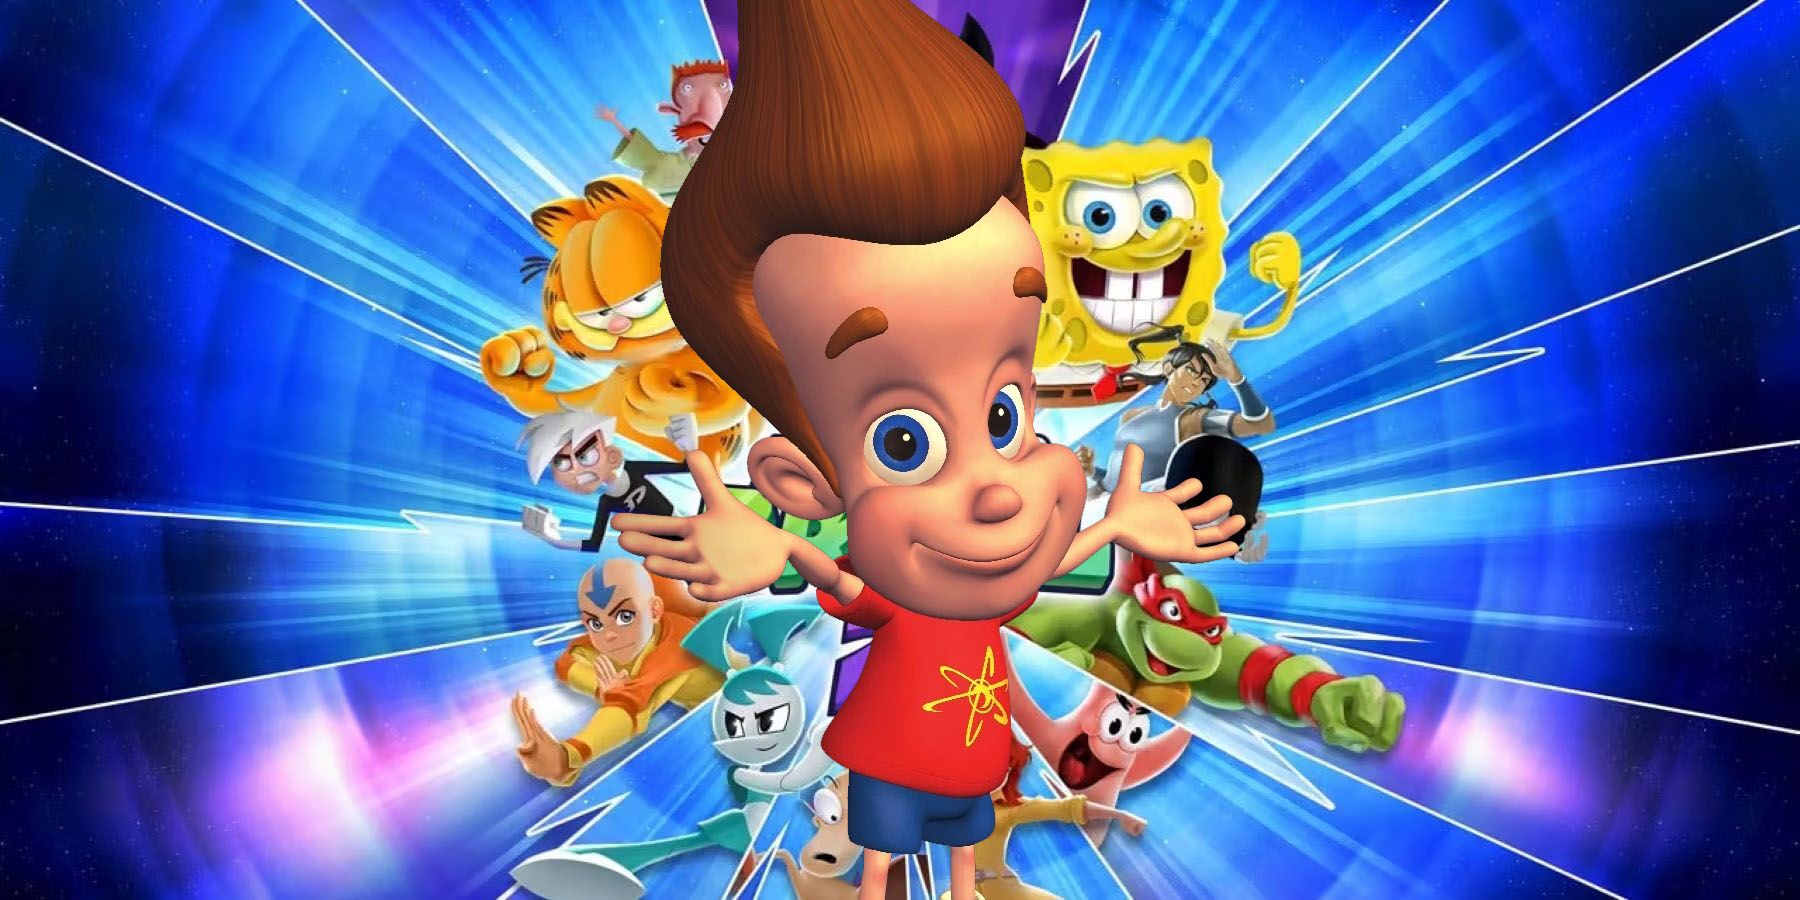 An image of Jimmy Neutron inserted into the official cover art for Nickelodeon All-Star Brawl 2.